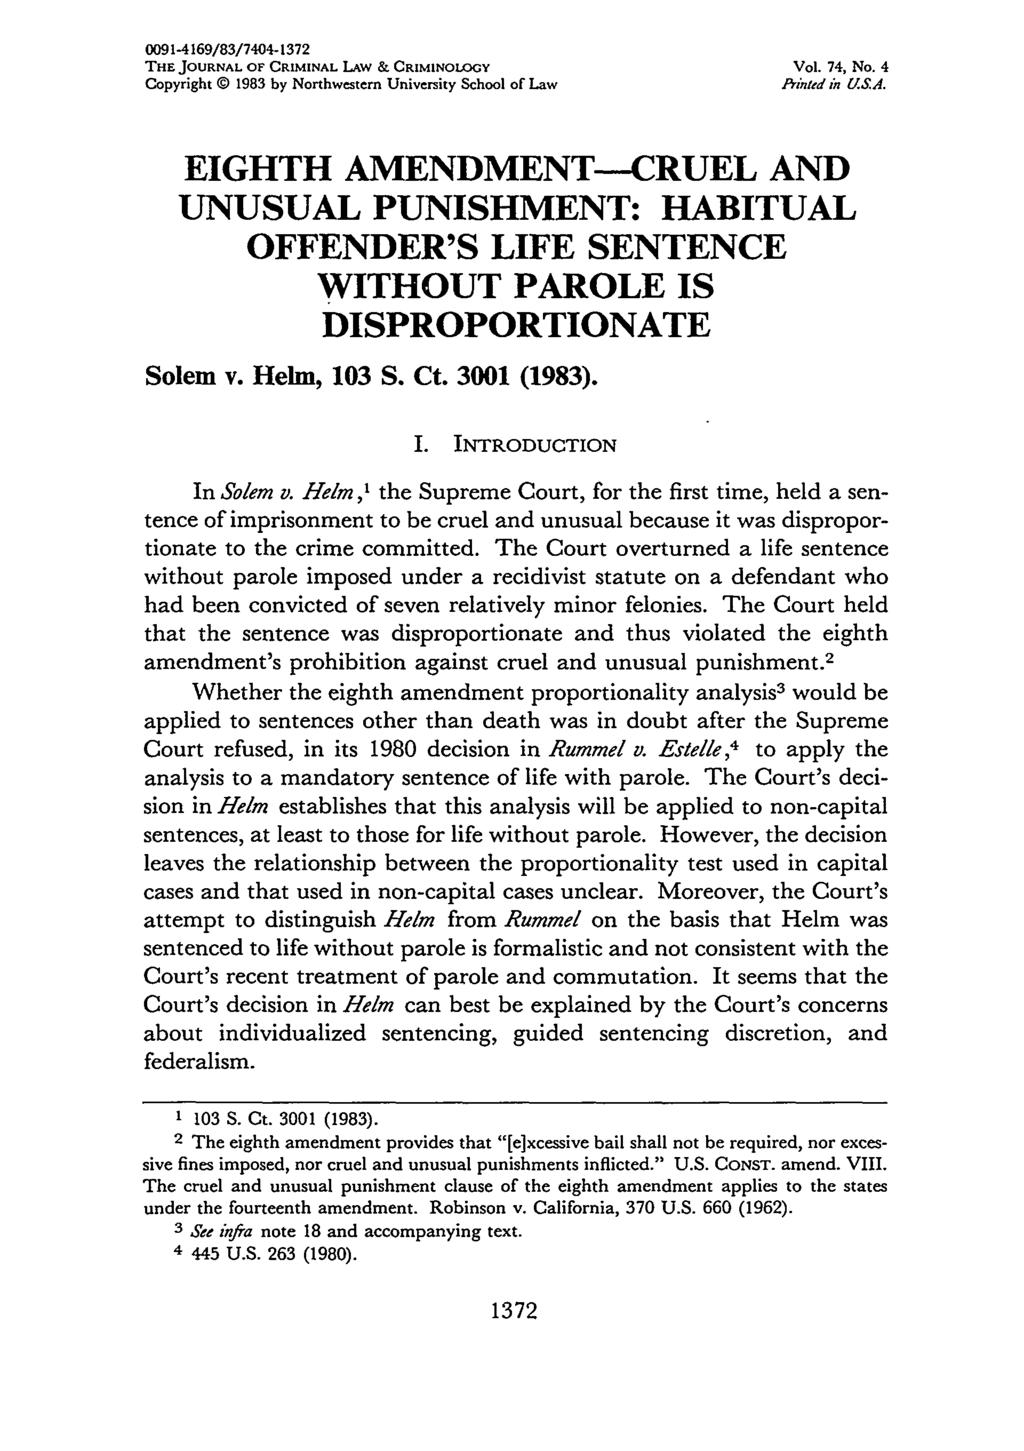 0091-4169/83/7404-1372 THE JOURNAL OF CRIMINAL LAw & CRIMINOLOGY Vol. 74, No. 4 Copyright C 1983 by Northwestern University School of Law Printed in US.A. EIGHTH AMENDMENT--CRUEL AND UNUSUAL PUNISHMENT: HABITUAL OFFENDER'S LIFE SENTENCE WITHOUT PAROLE IS DISPROPORTIONATE Solem v.